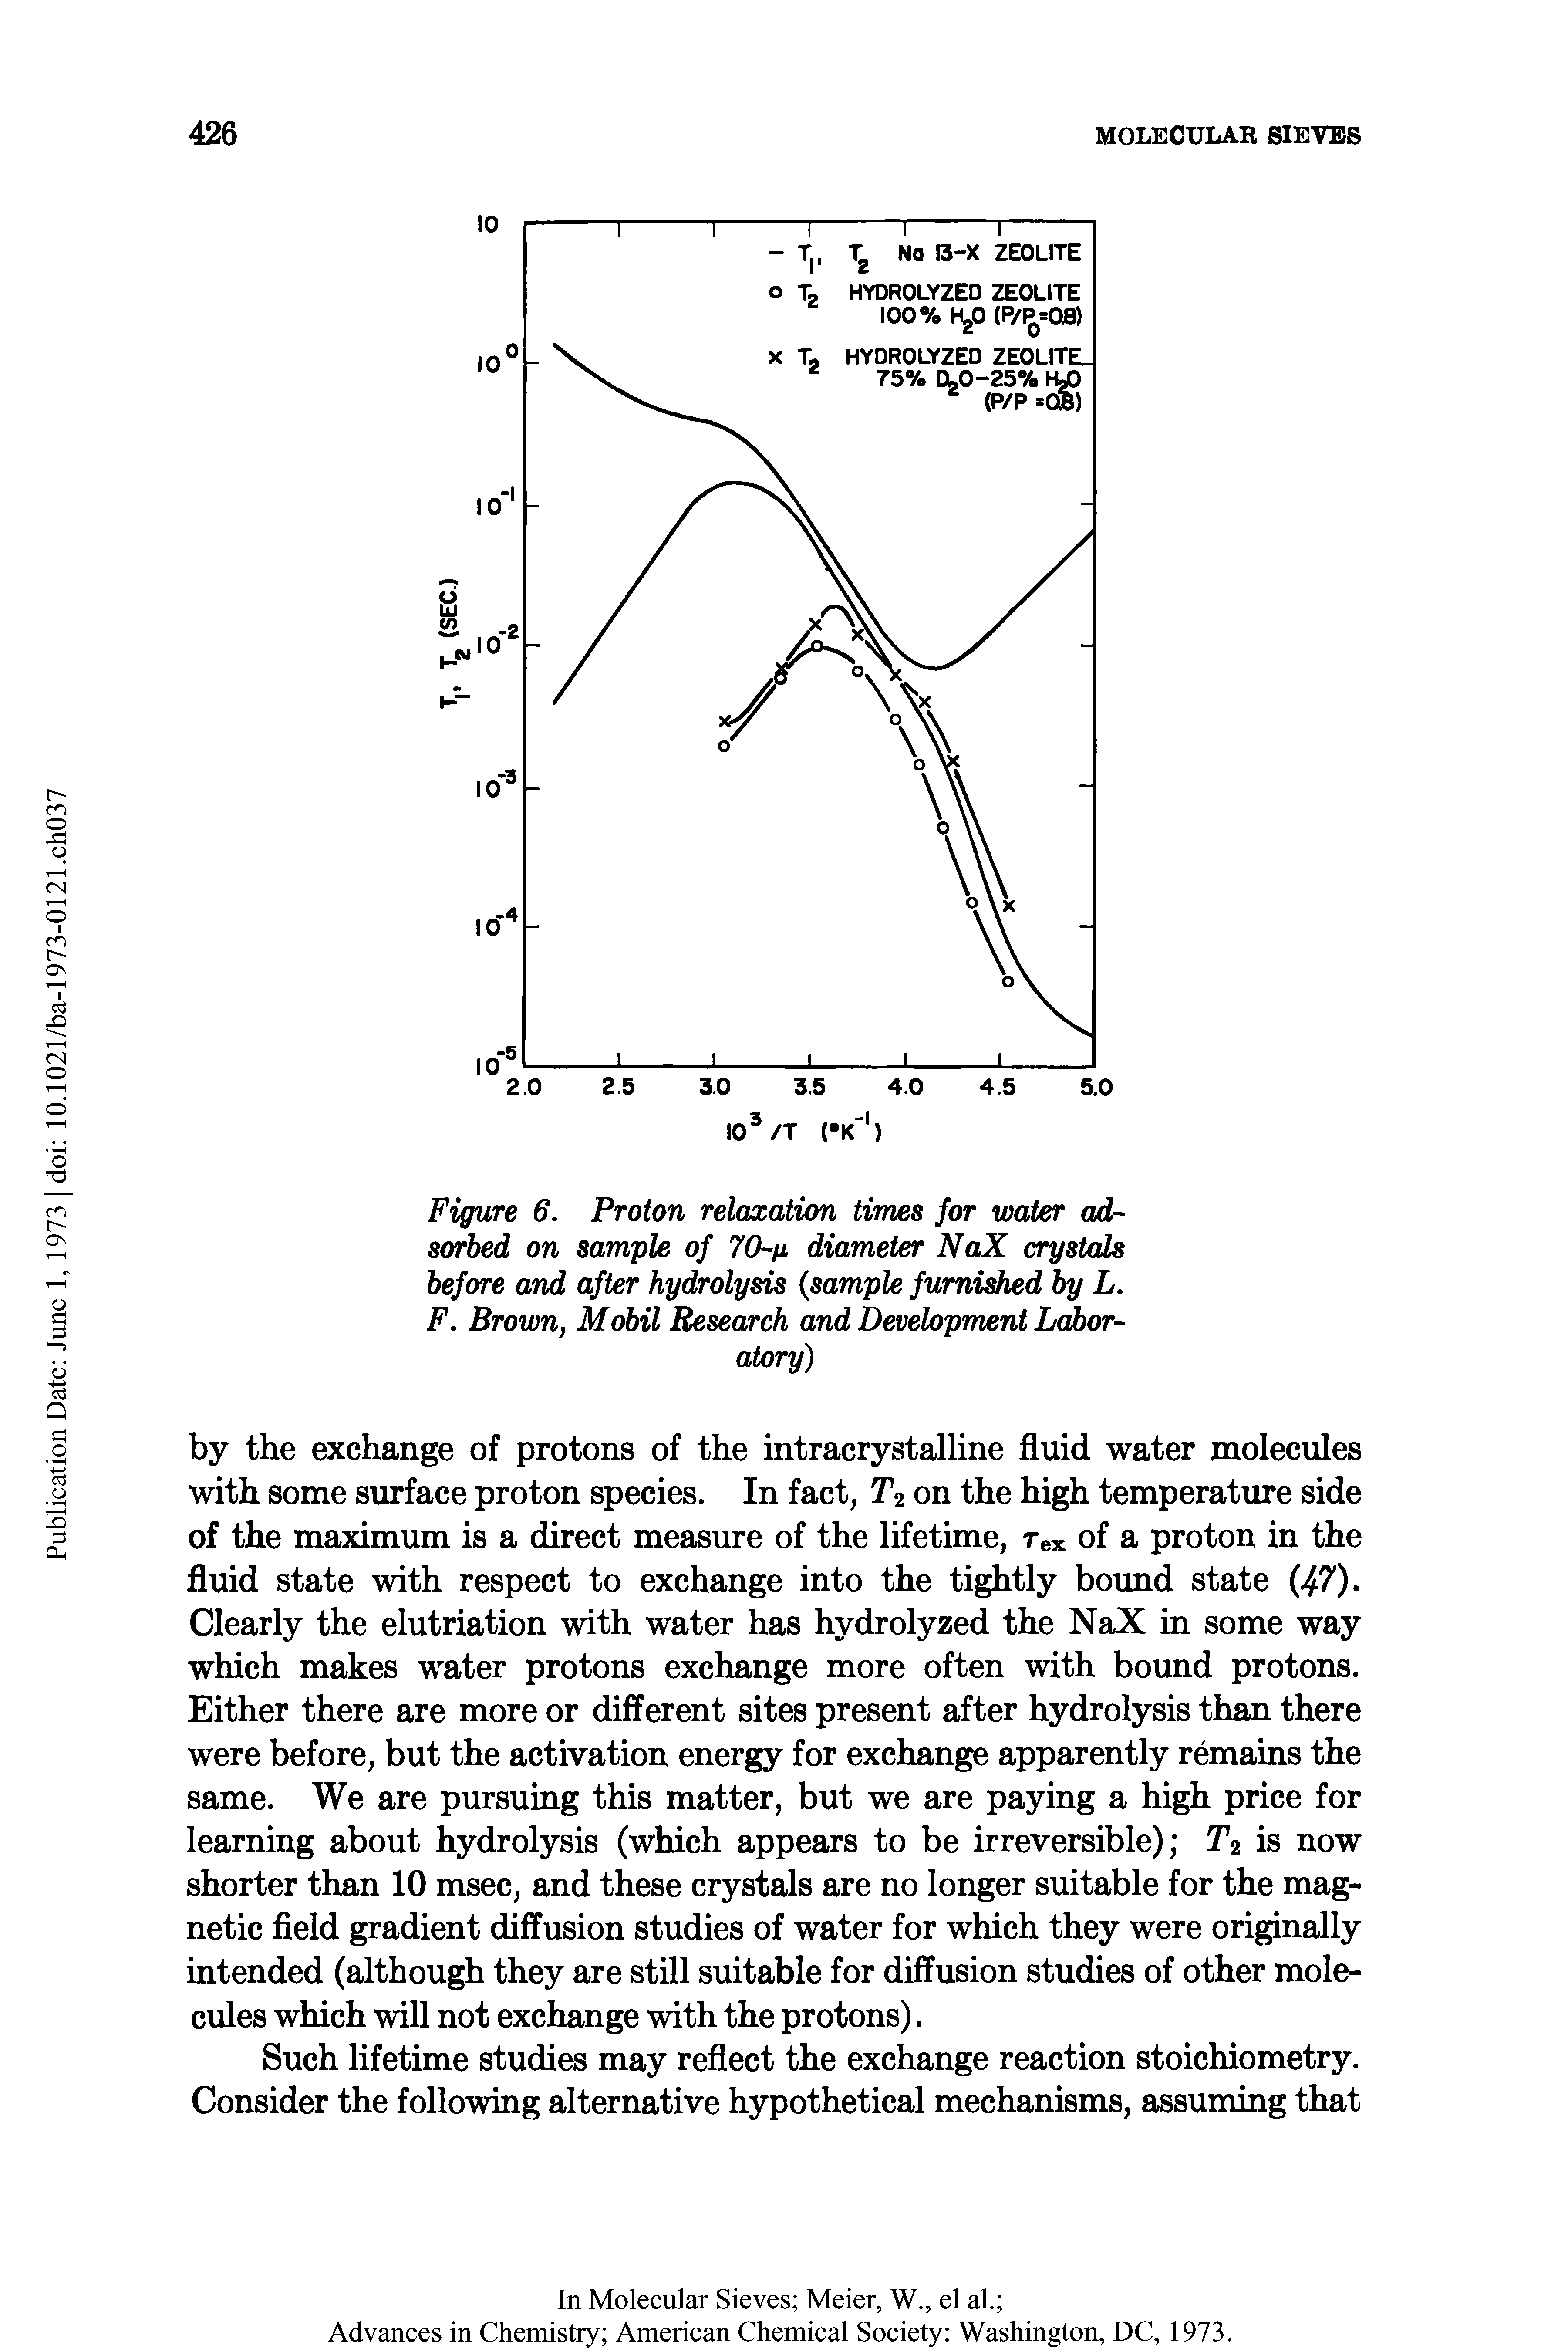 Figure 6. Proton relaxation times for water adsorbed on sample of 70-n diameter NaX crystals before and after hydrolysis (sample furnished by L.